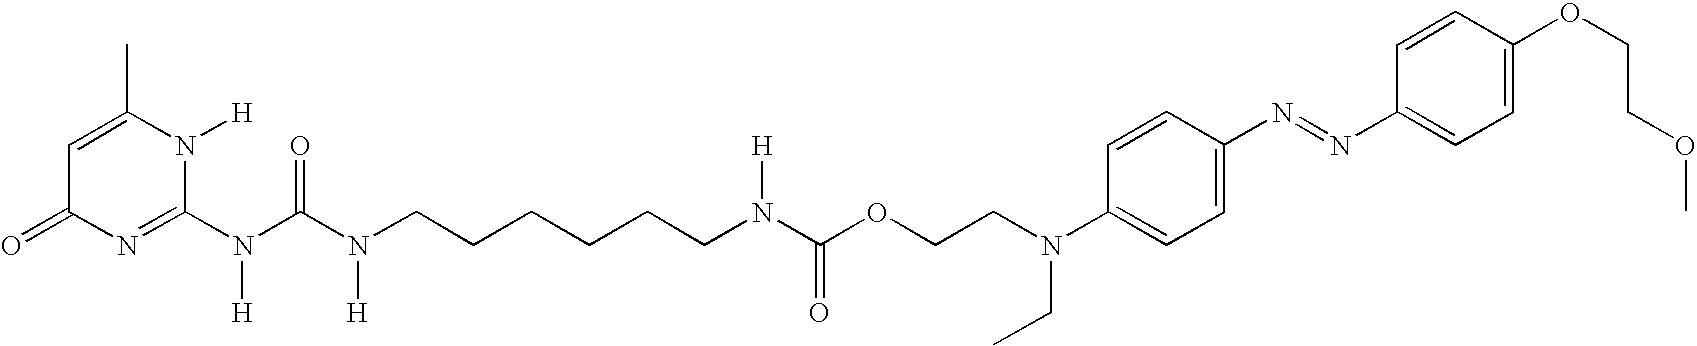 Ink composition containing a particular type of dye, and corresponding ink-jet printing process